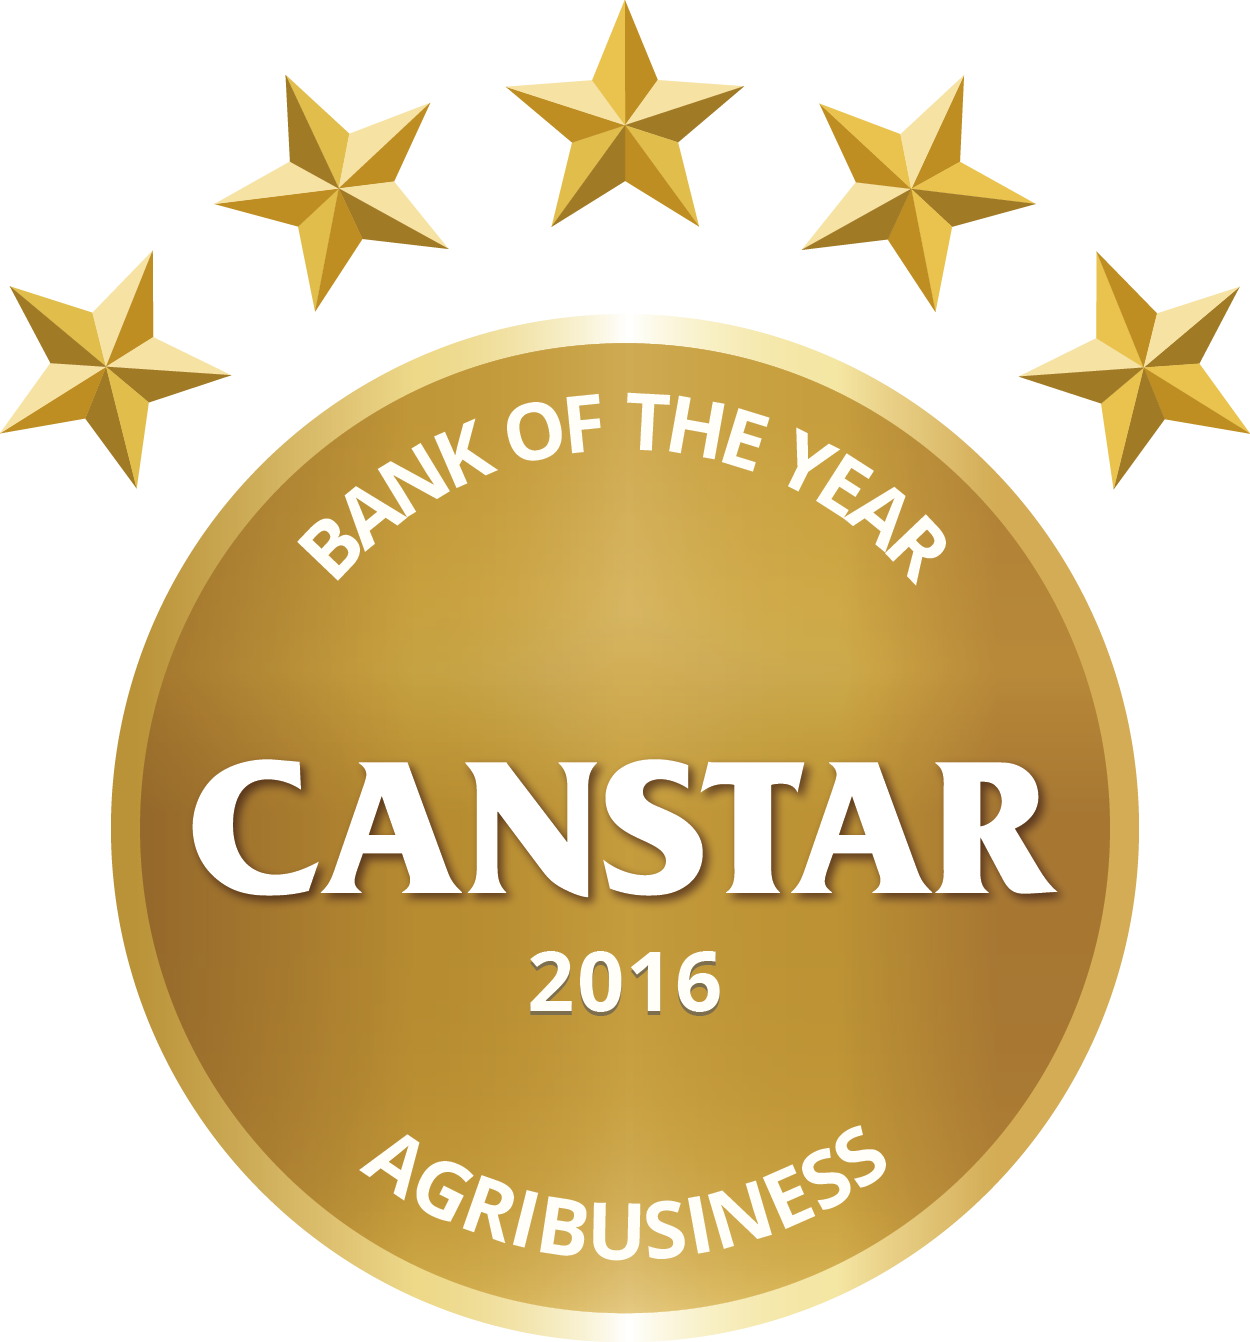 CANSTAR 2016 – Bank of the Year – Agribusiness